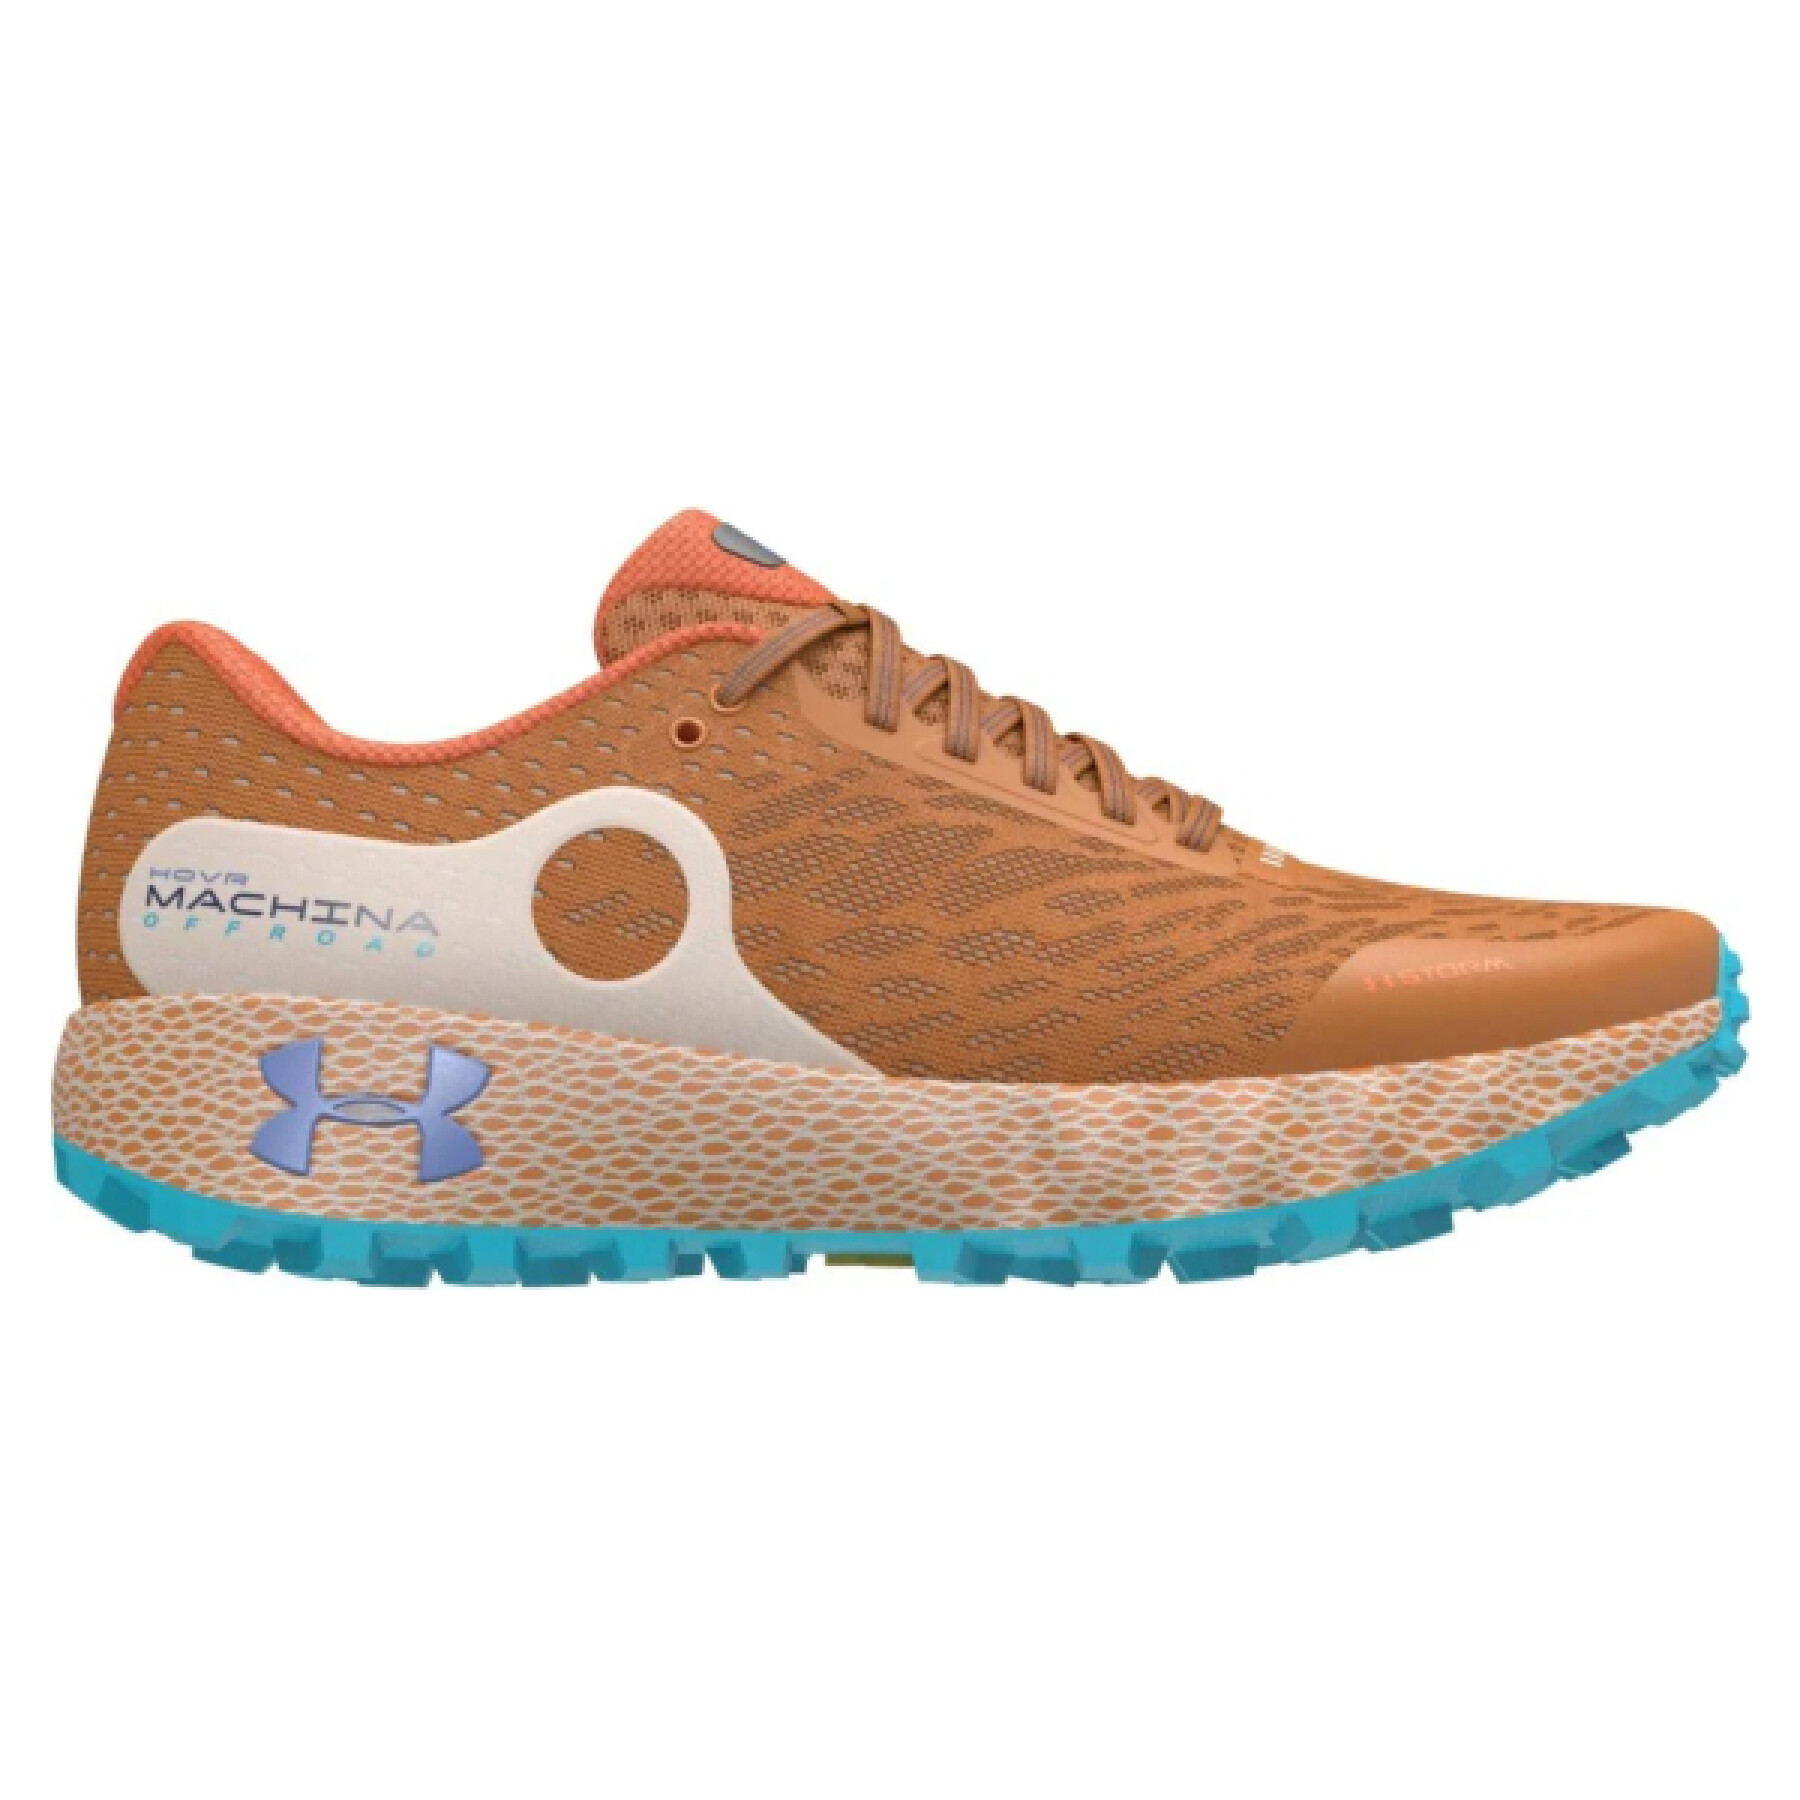 Women's shoes running Under Armour HOVR™ Machina Off Road